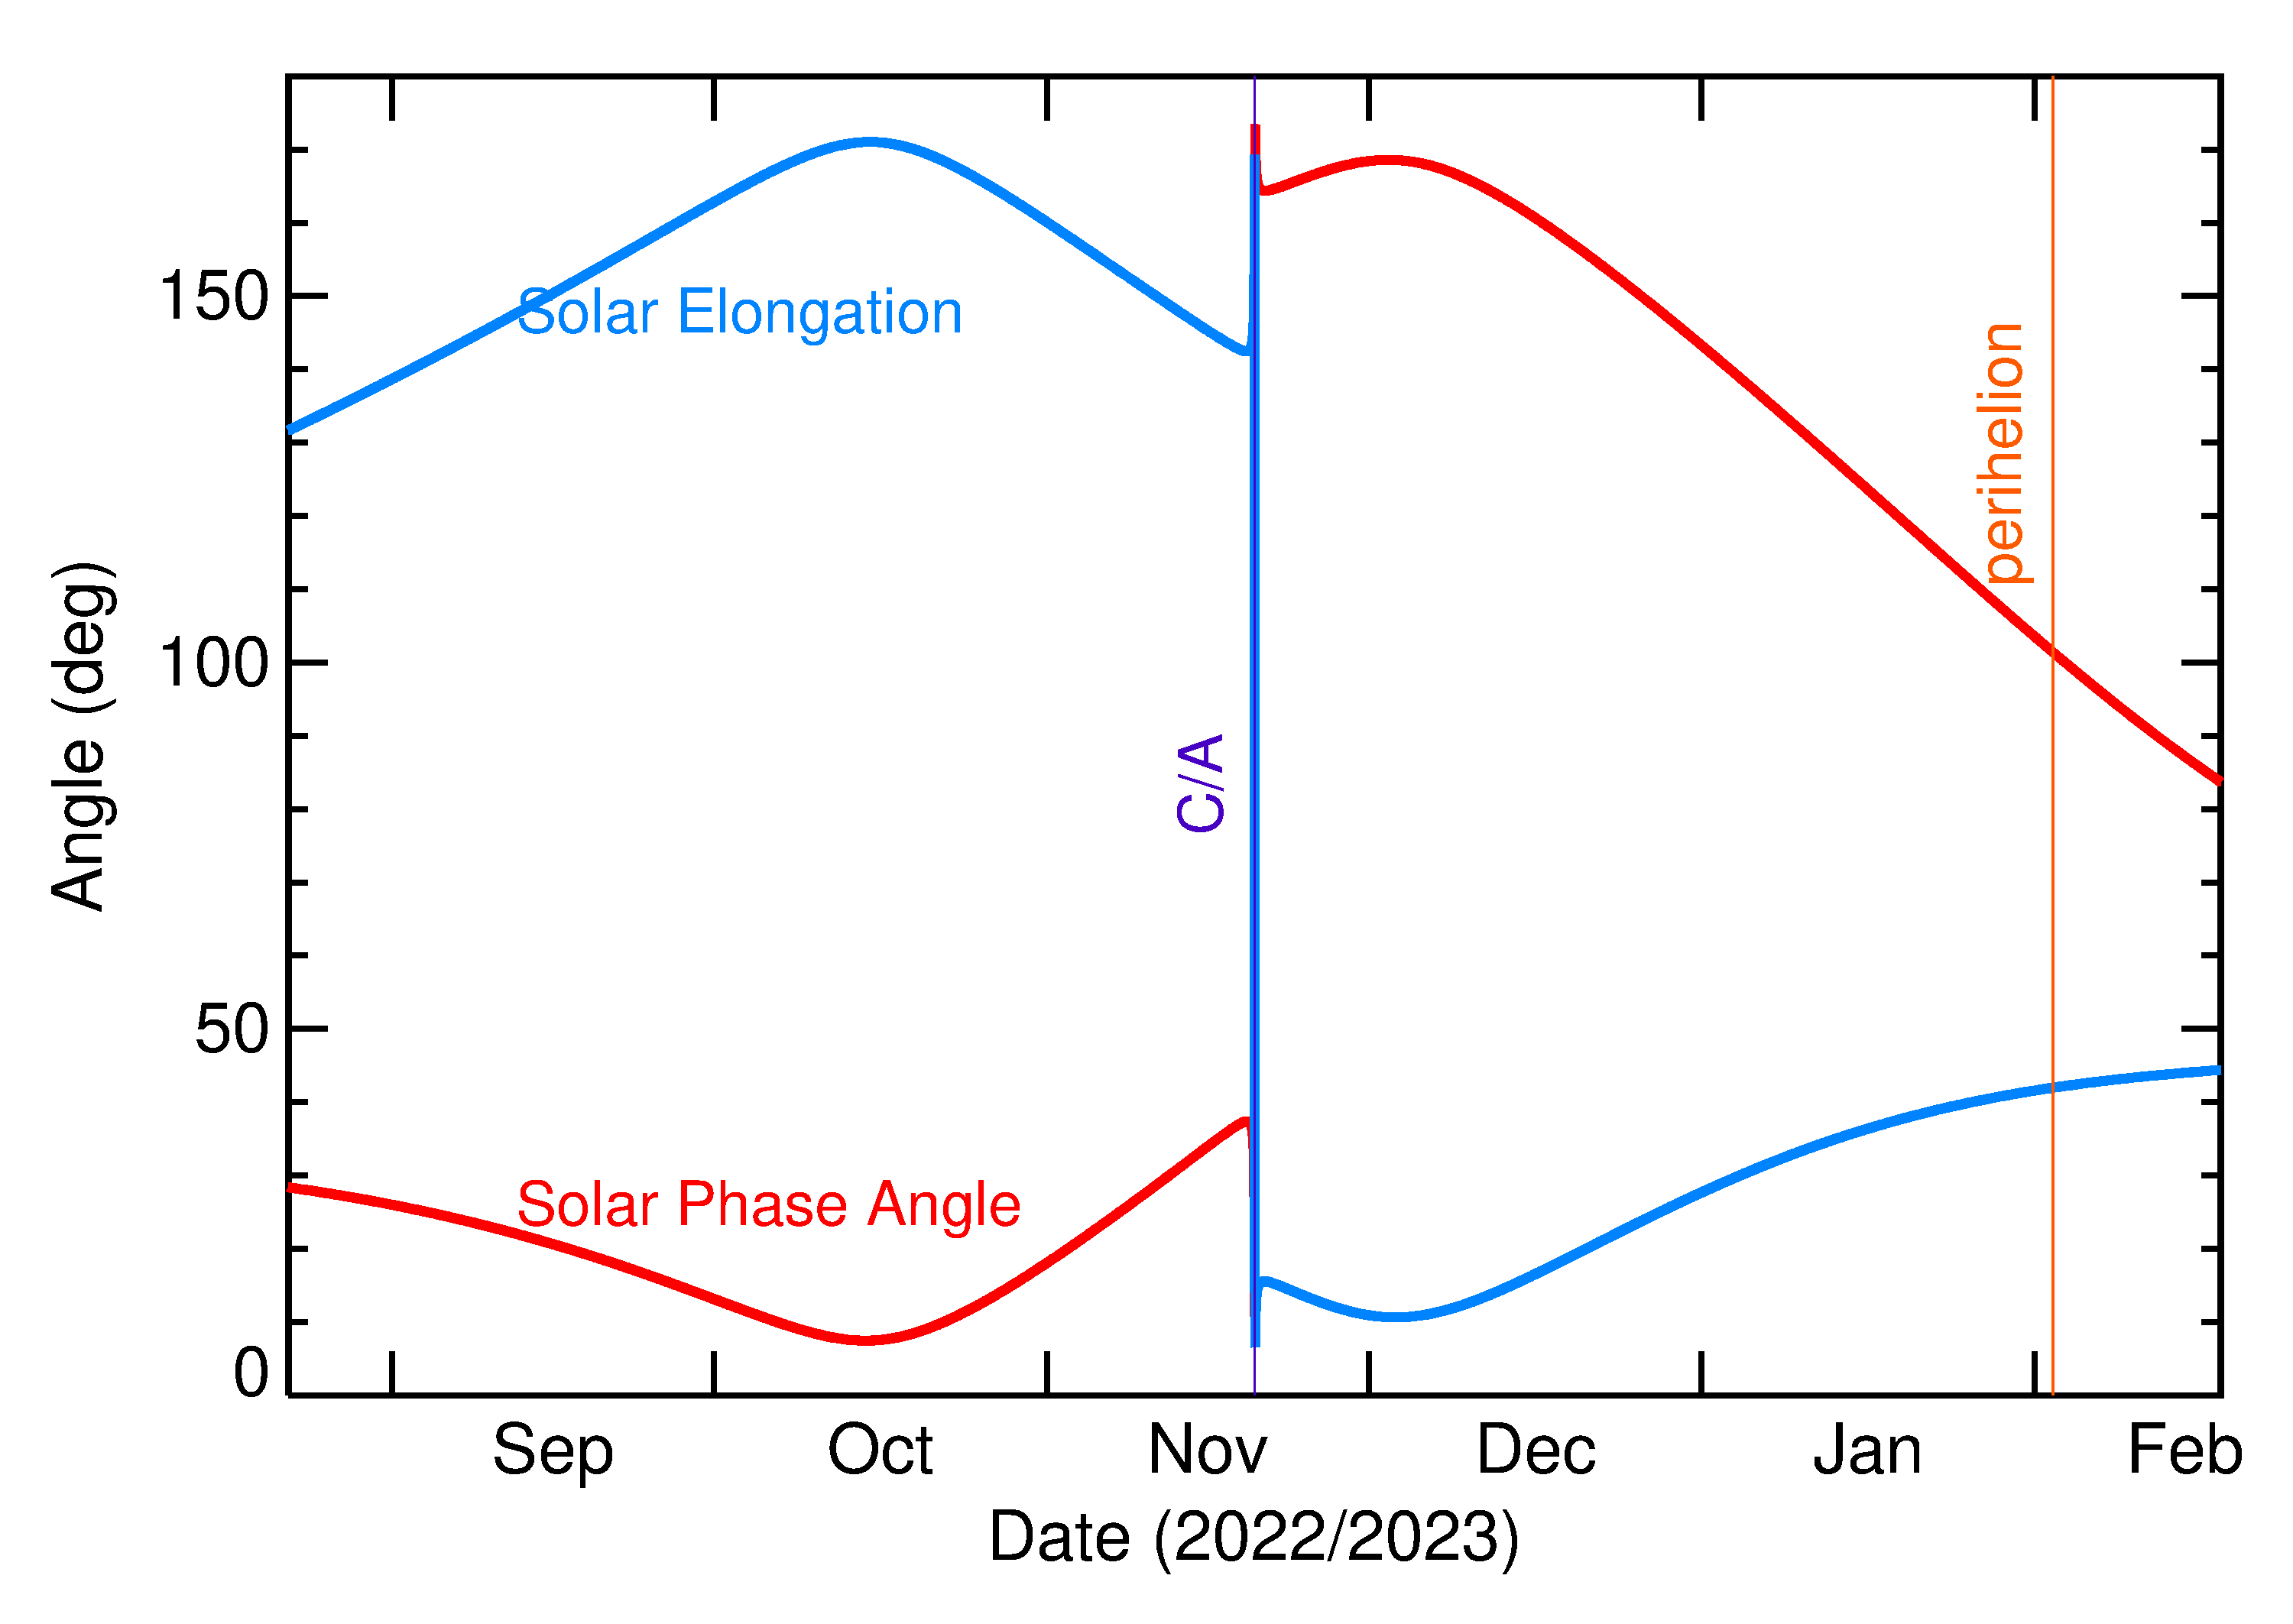 Solar Elongation and Solar Phase Angle of 2022 WJ1 in the months around closest approach